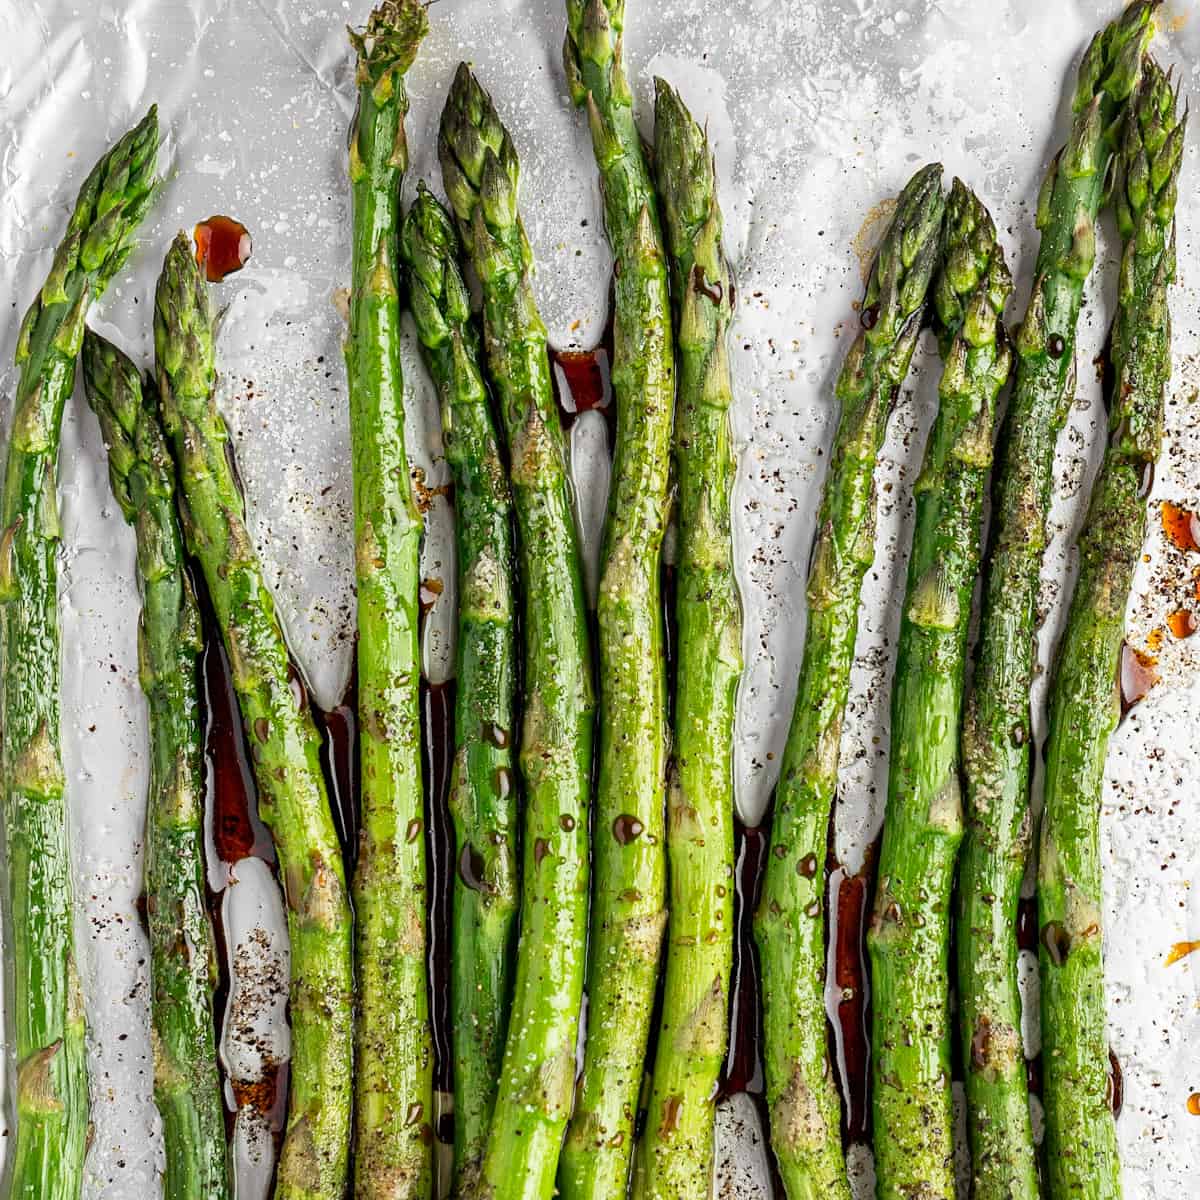 Gren grilled asparagus with balsamic vinegar drops over it.